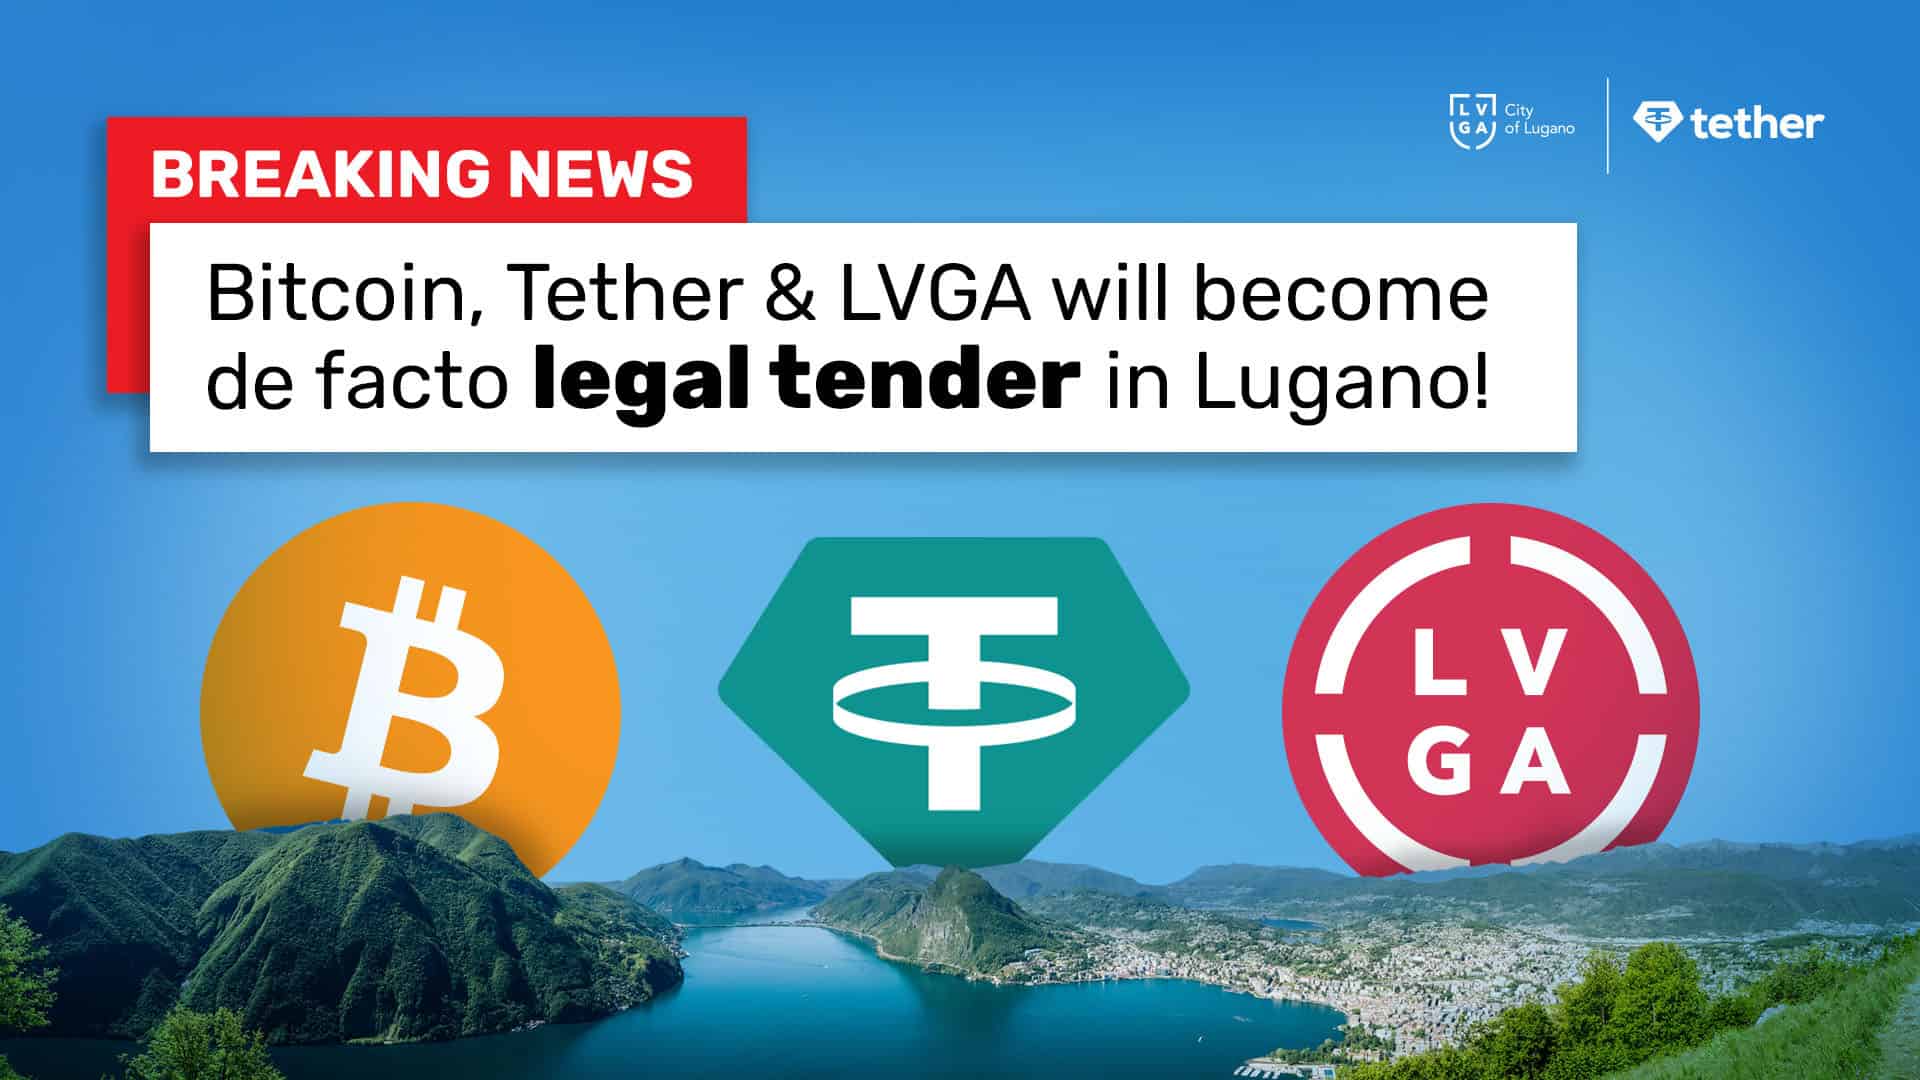 The city of Lugano Will Make Bitcoin, Tether, and LVGA a Legal Tender